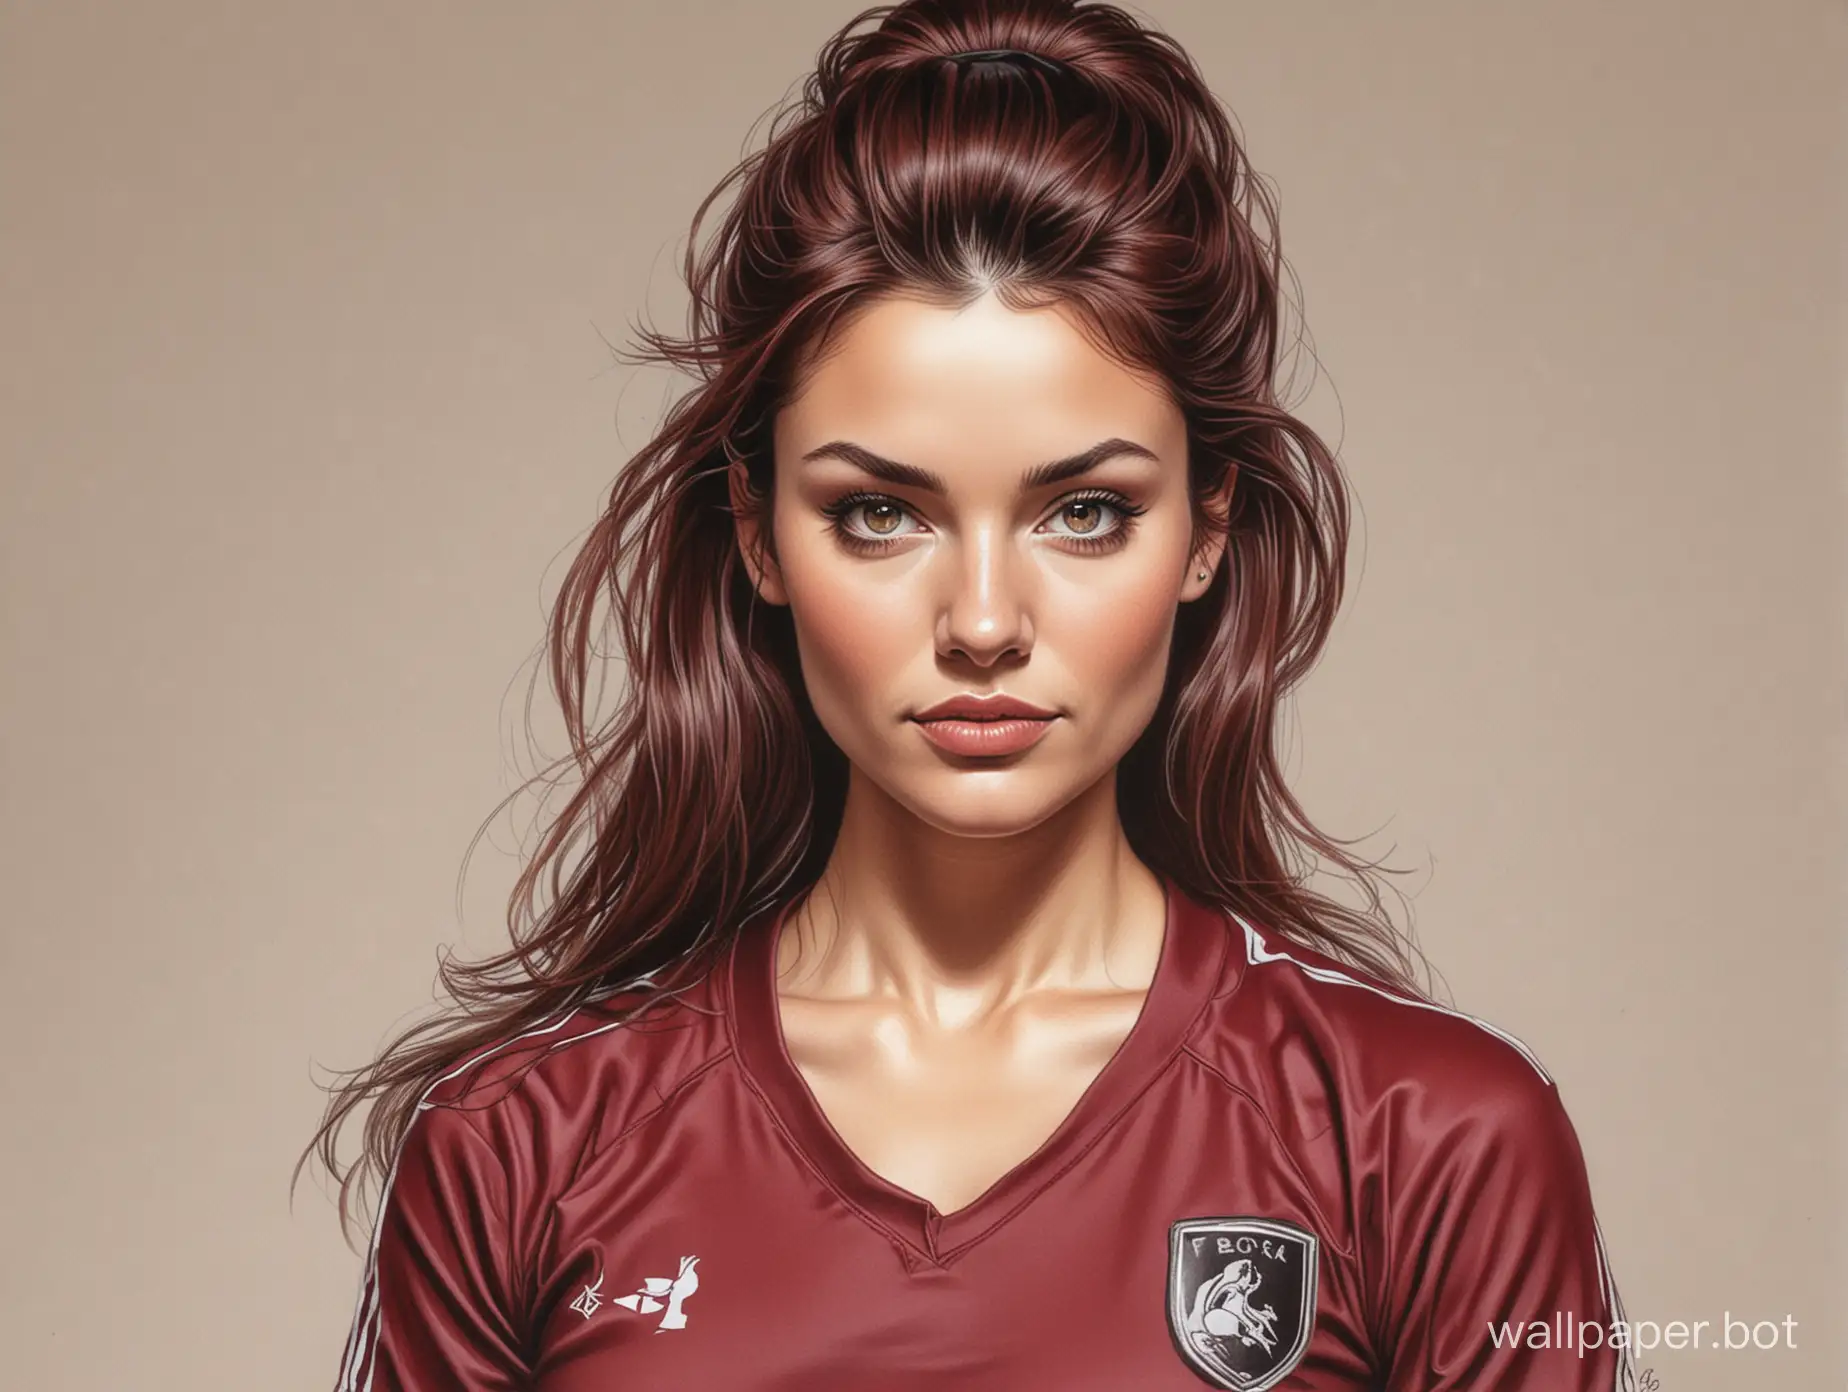 Sketch Victoria Clough hair with styling 4 size breasts narrow waist In black-burgundy soccer uniform white background sketch marker Style Boris Vallejo portrait